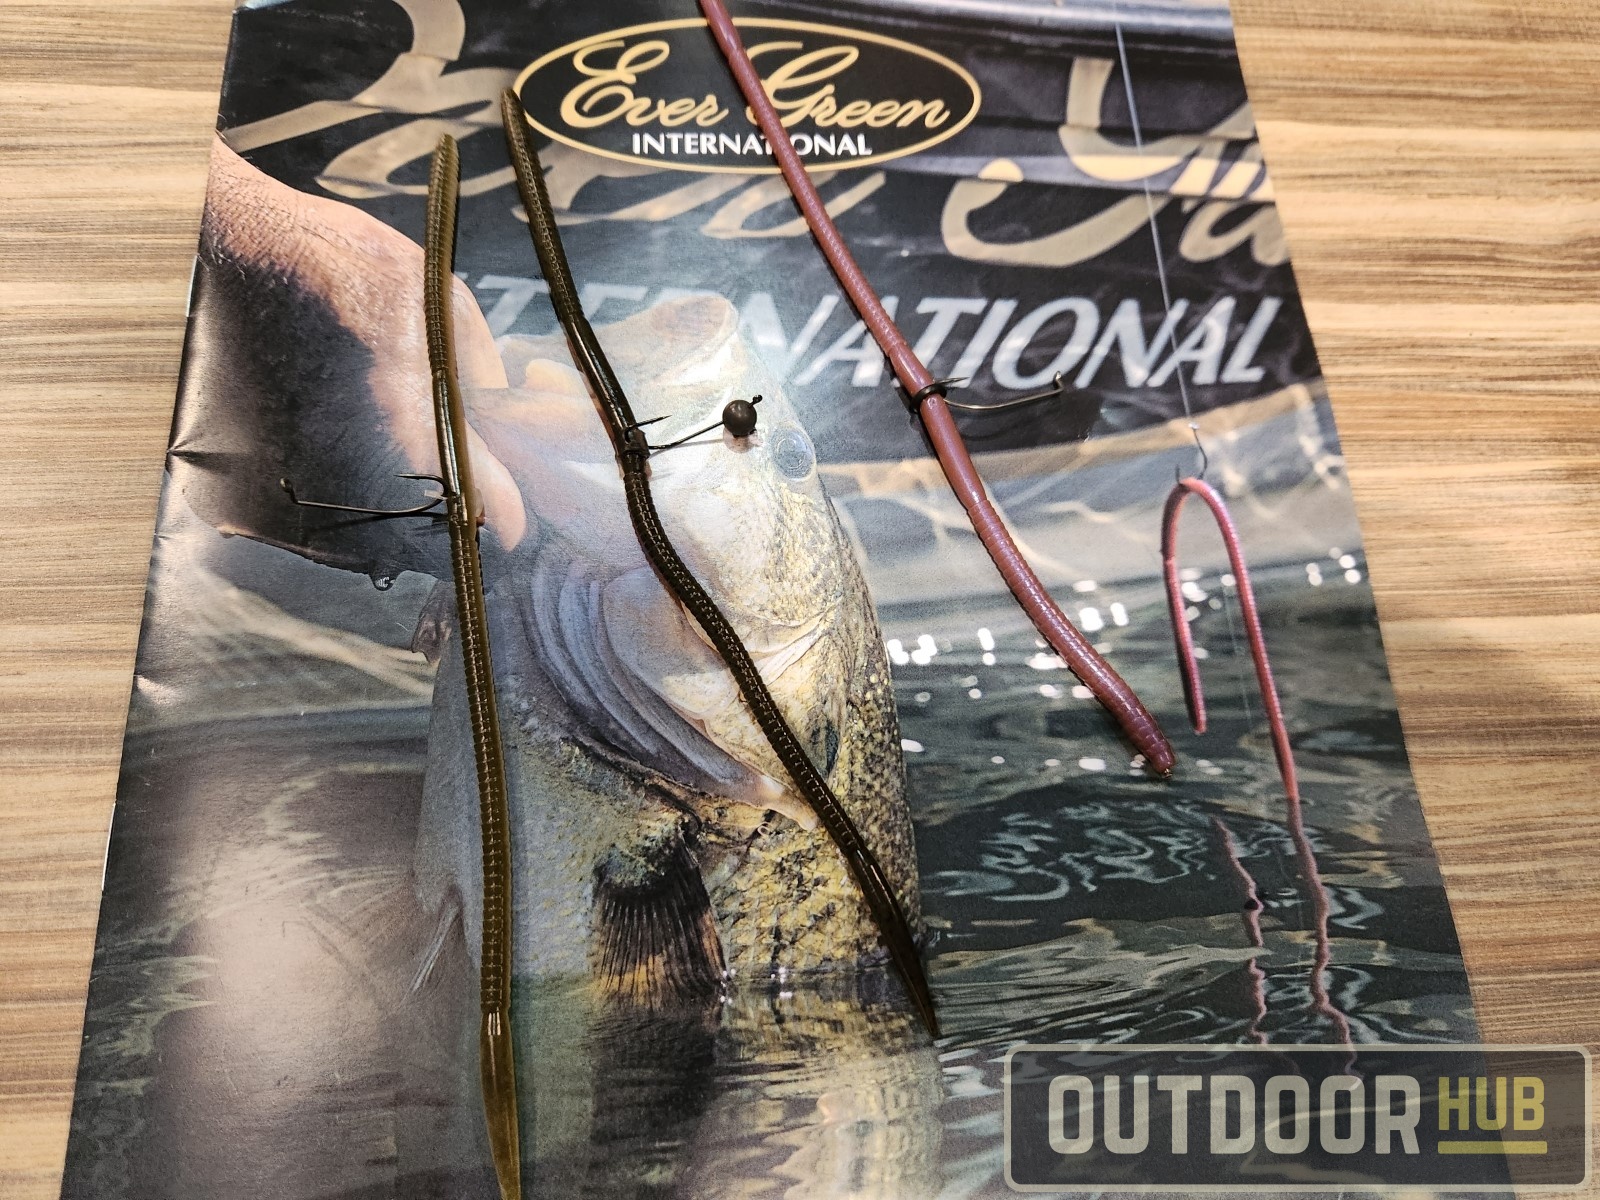 [ICAST 2023] Ever Green International's Bow Worm Noodle